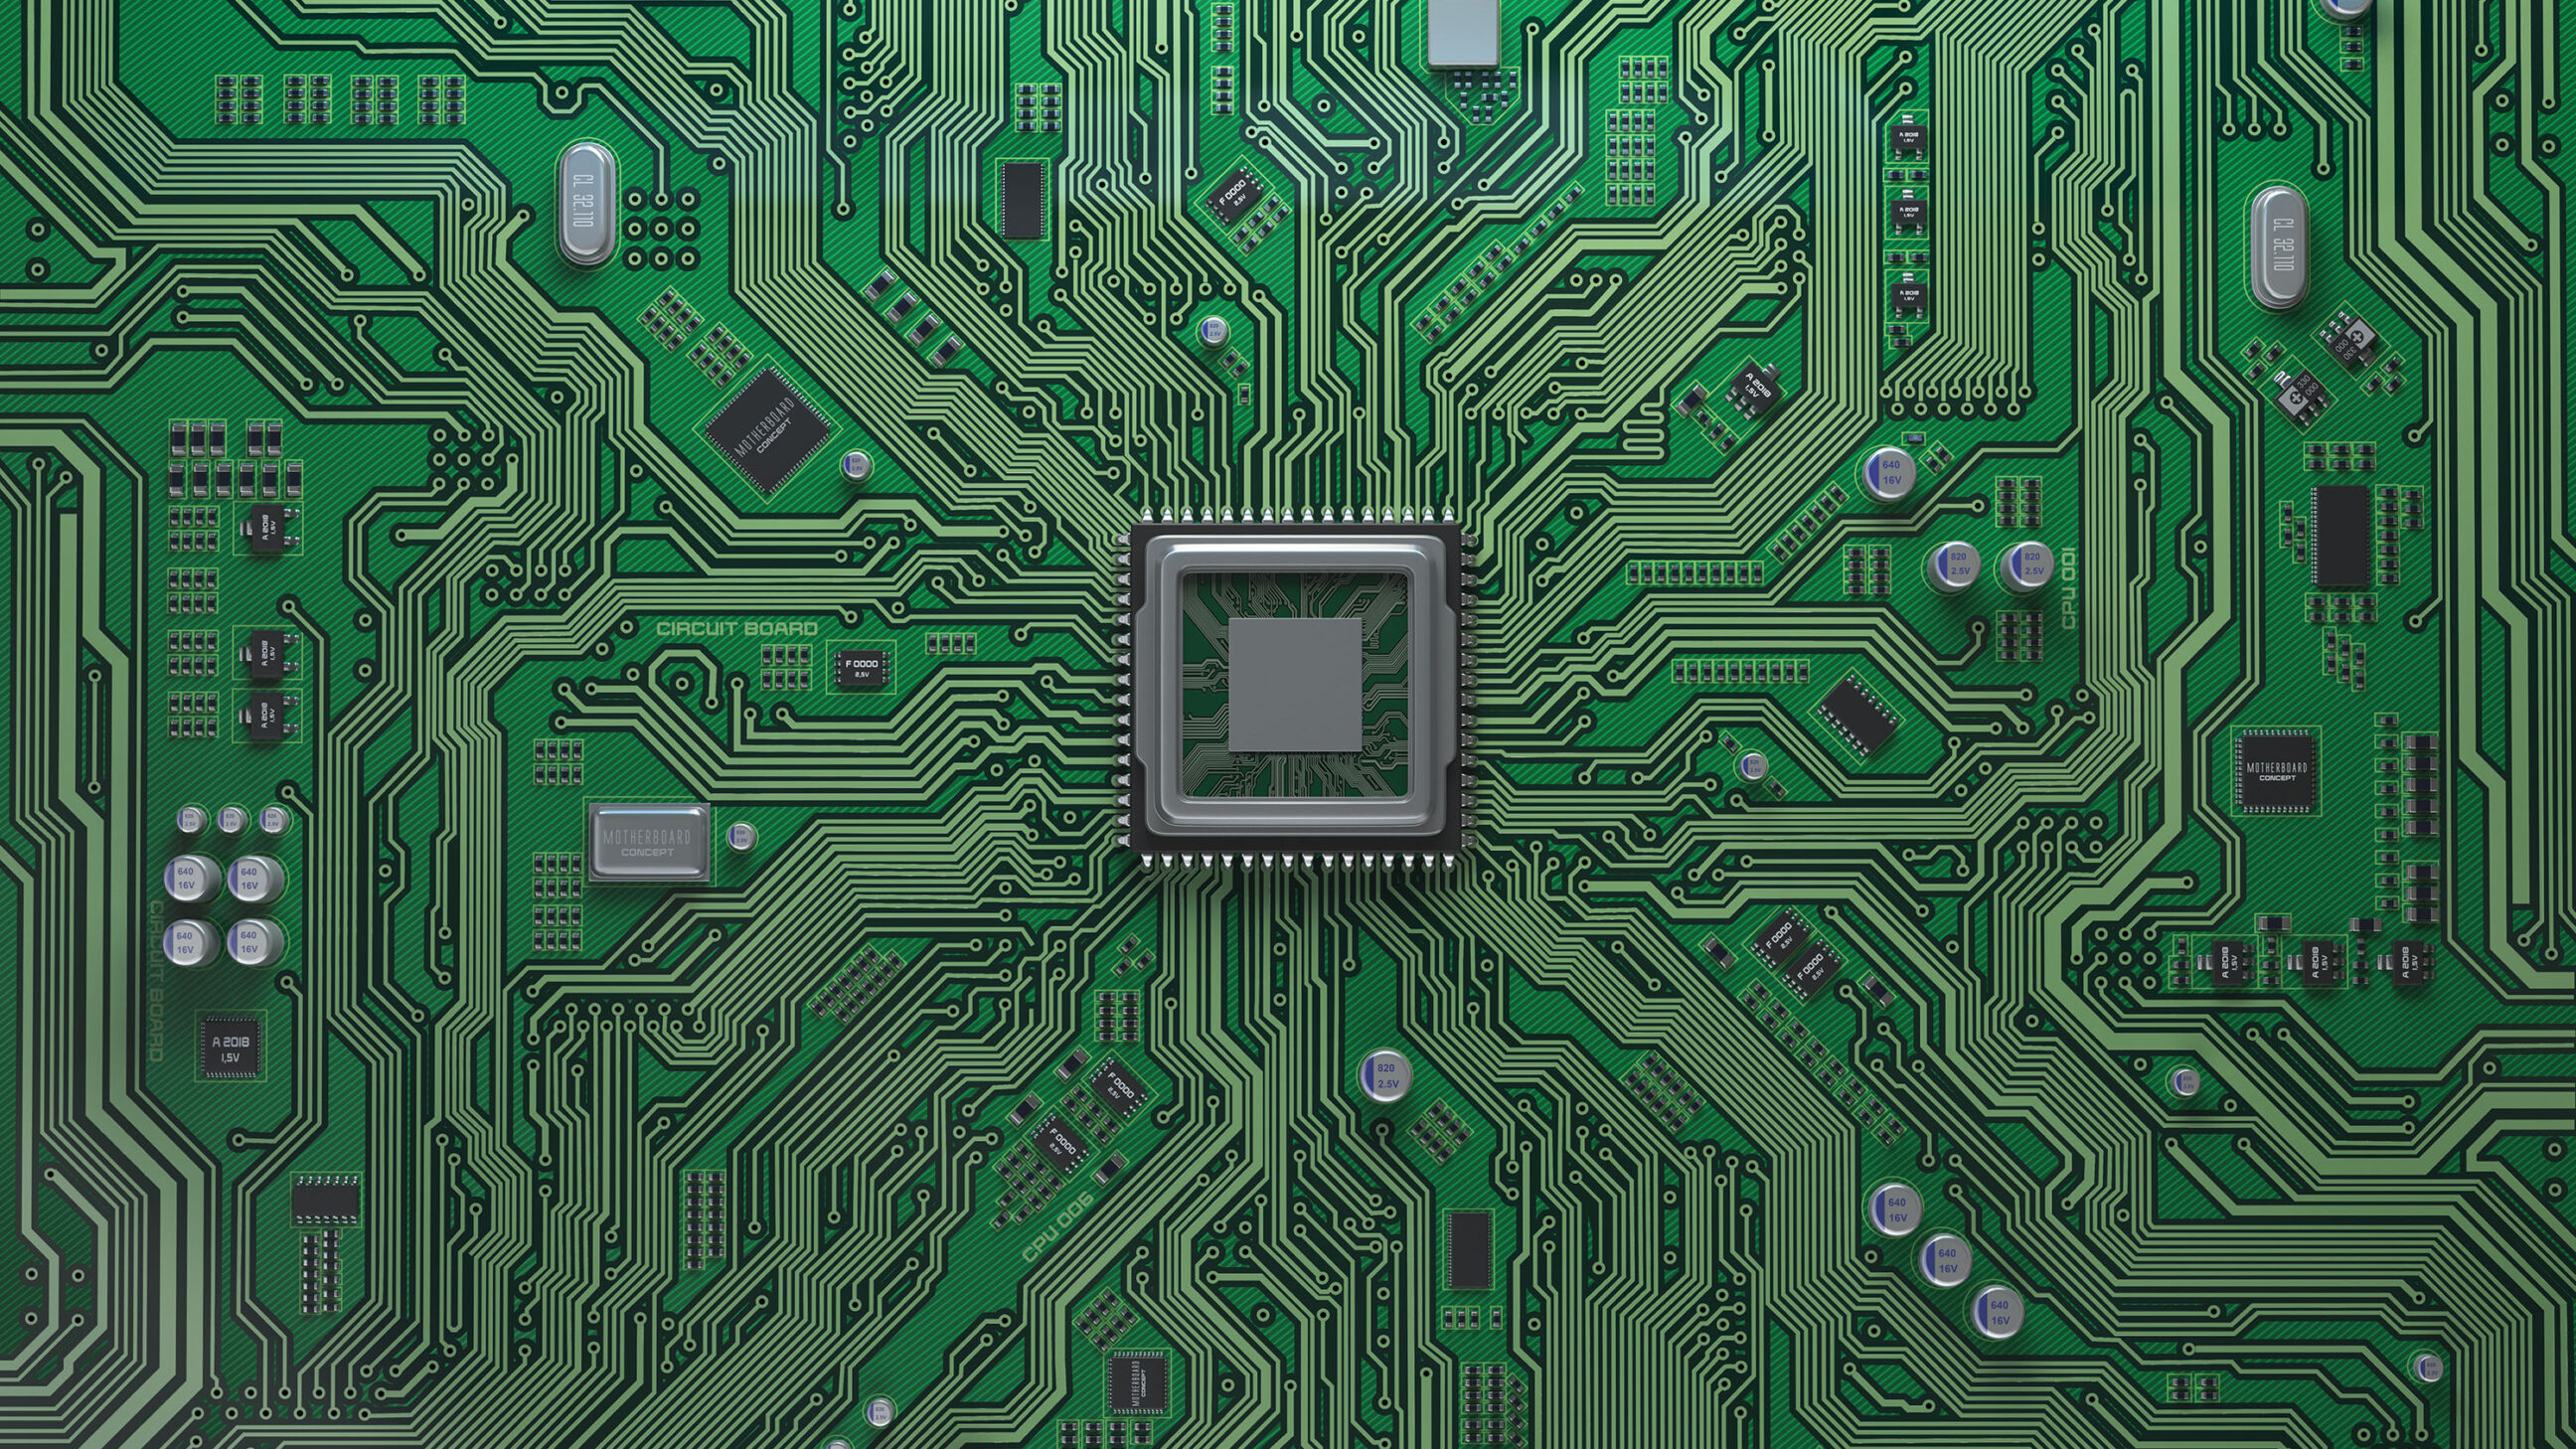 Computer motherboard with CPU. Circuit board system chip with core processor. Computer technology background. 3d illustration